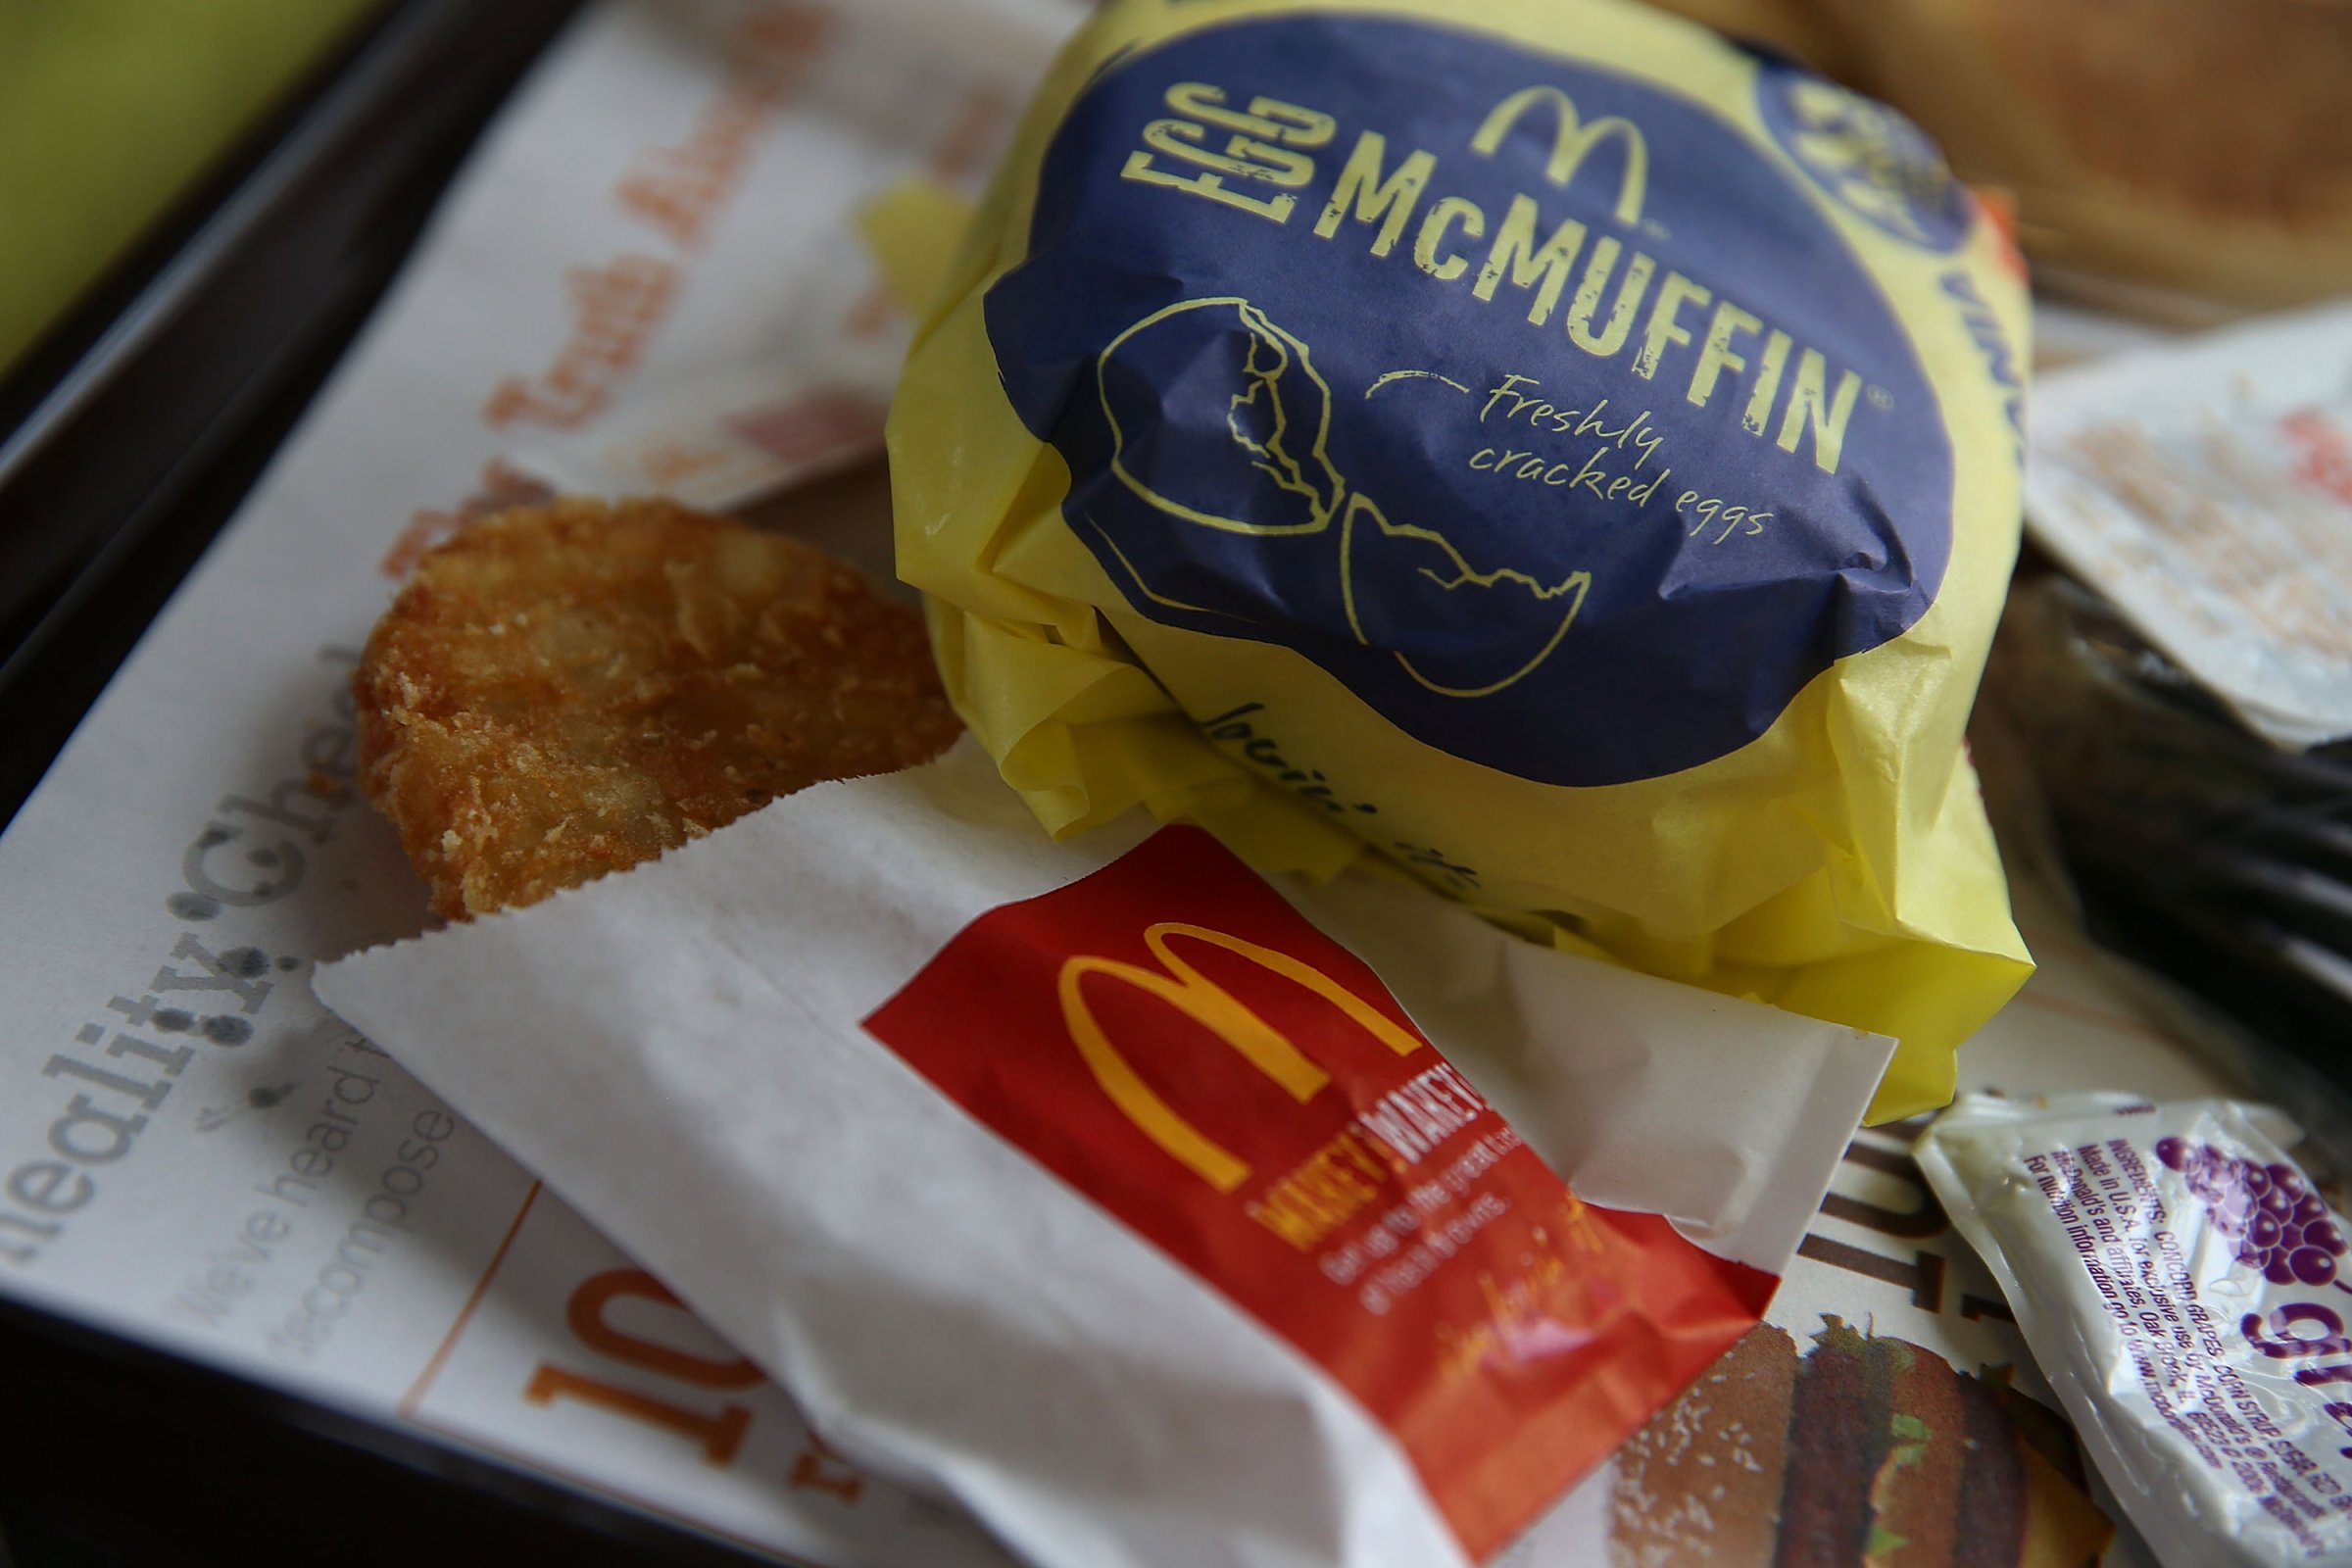 A McDonald's Egg McMuffin and hash browns are displayed at a McDonald's restaurant on July 23, 2015 in Fairfield, California.